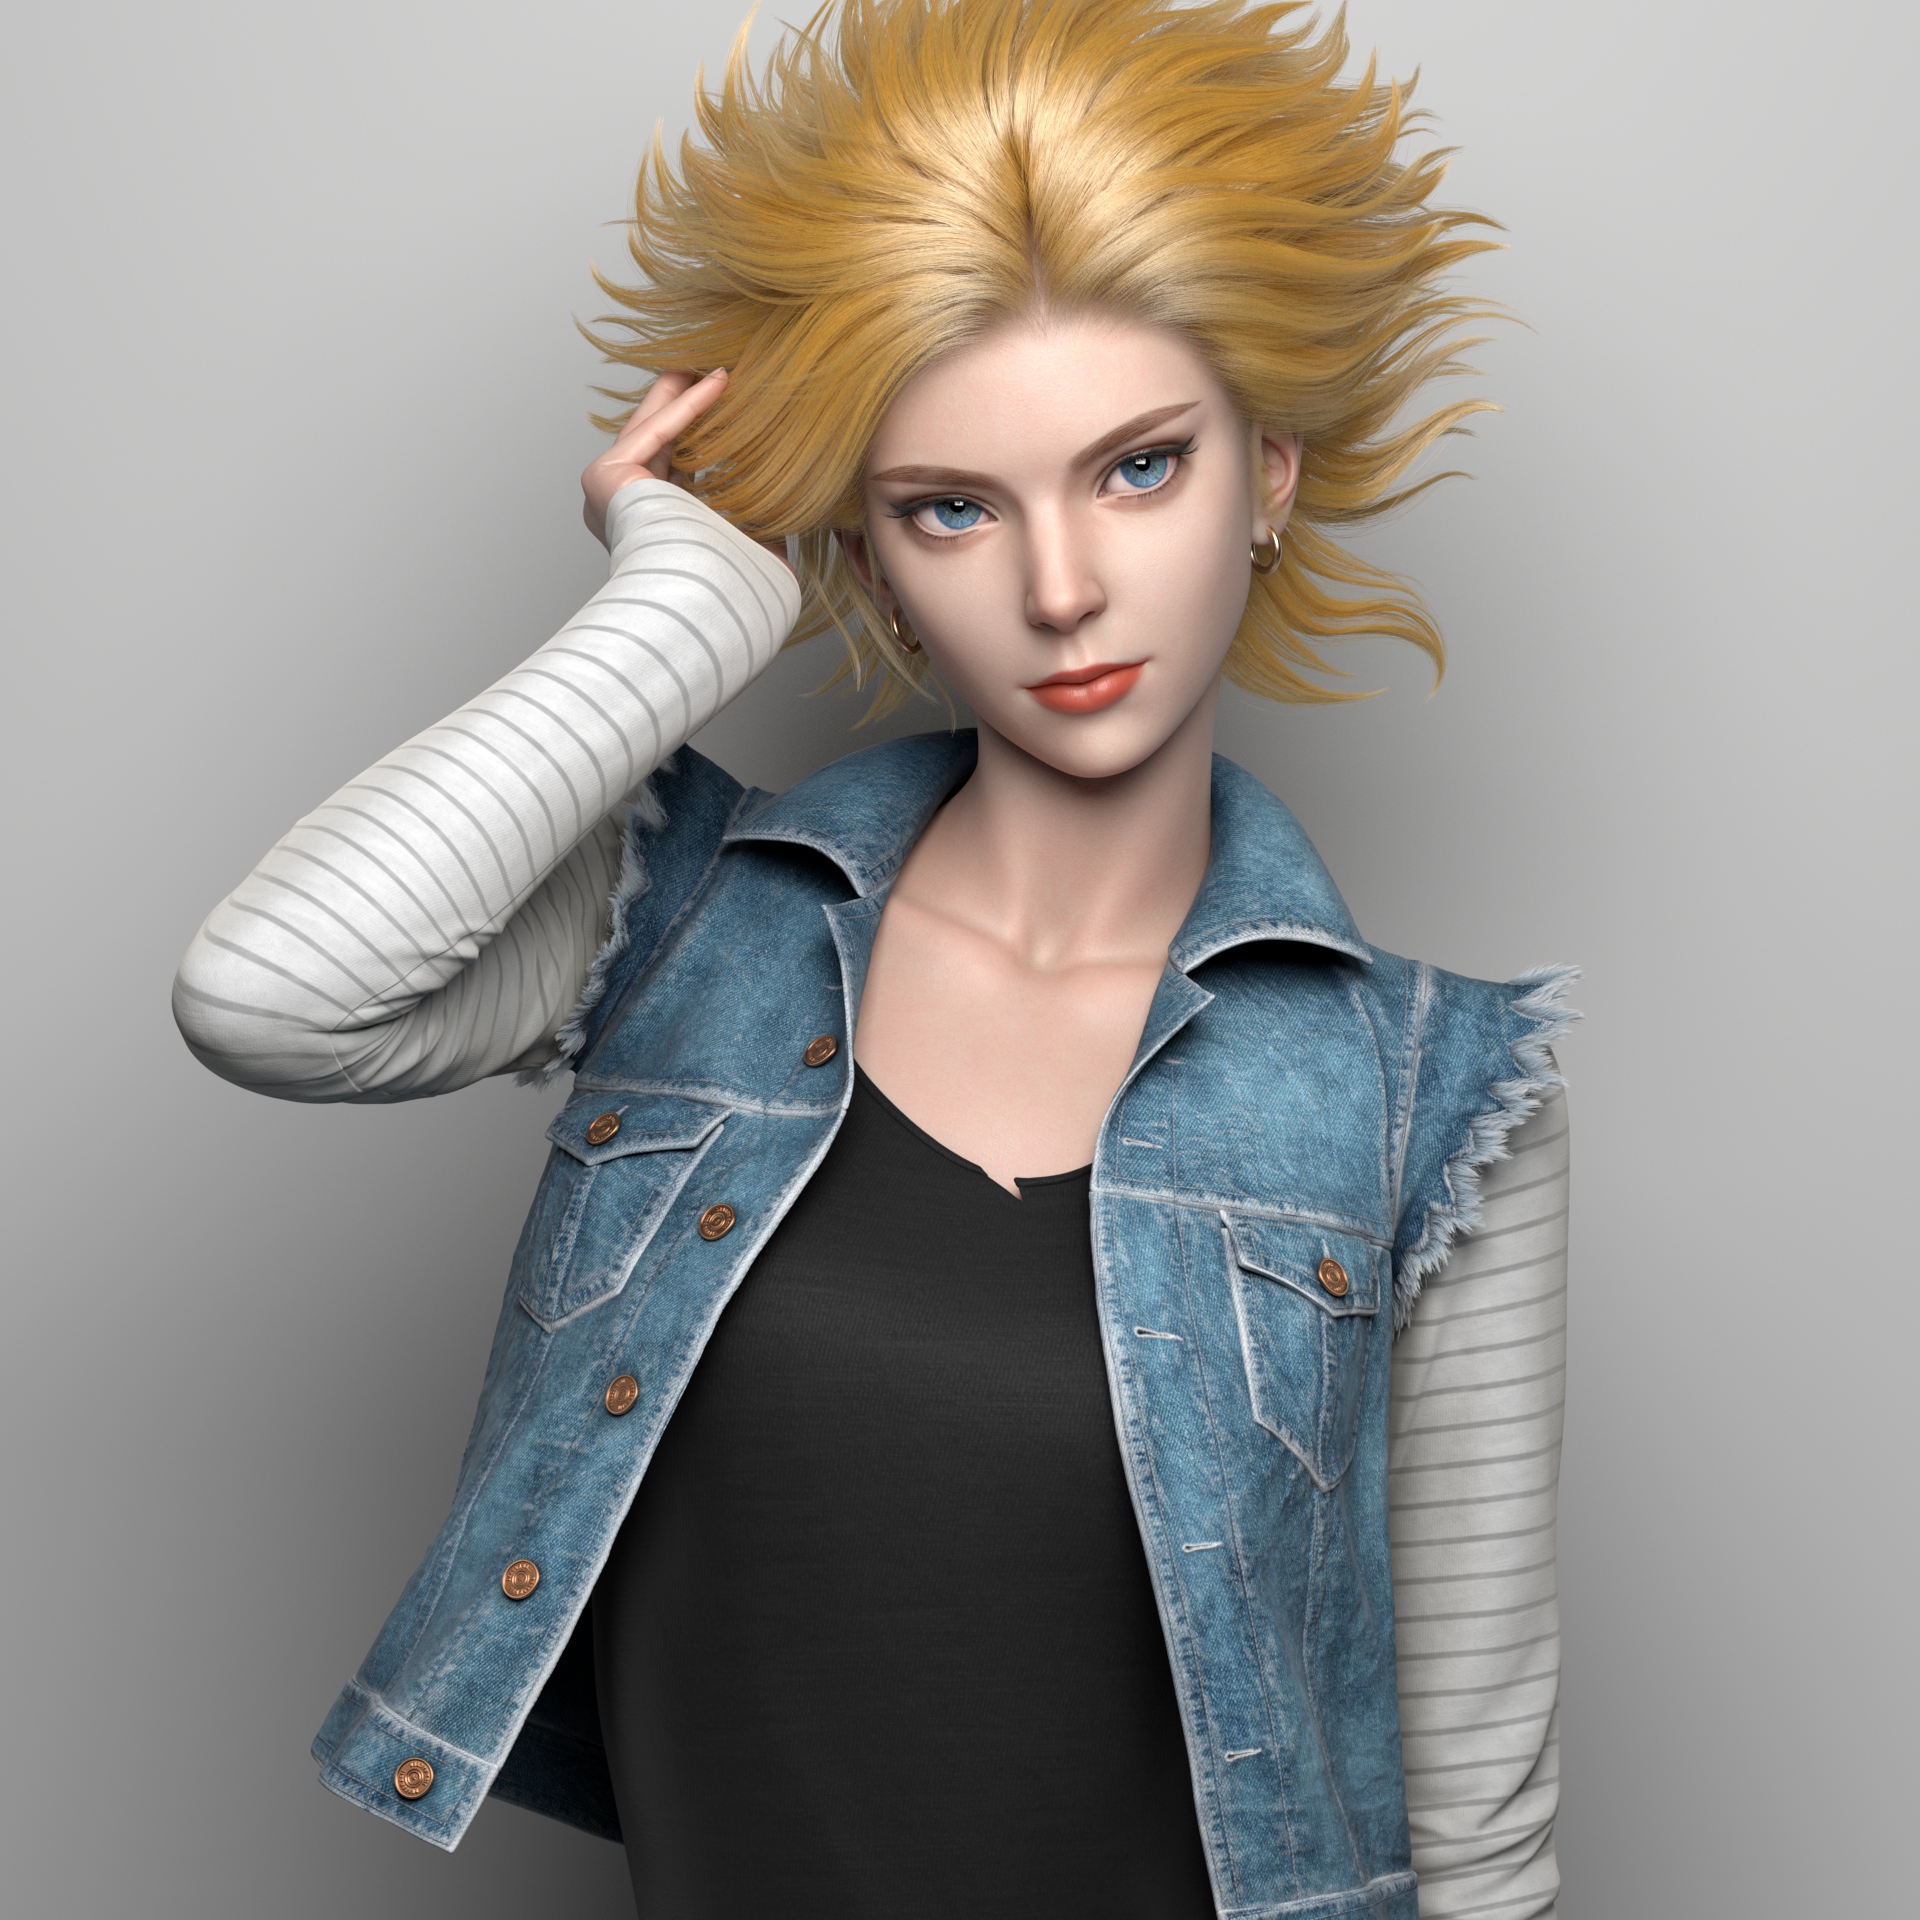 android 18 real life naked with bottle